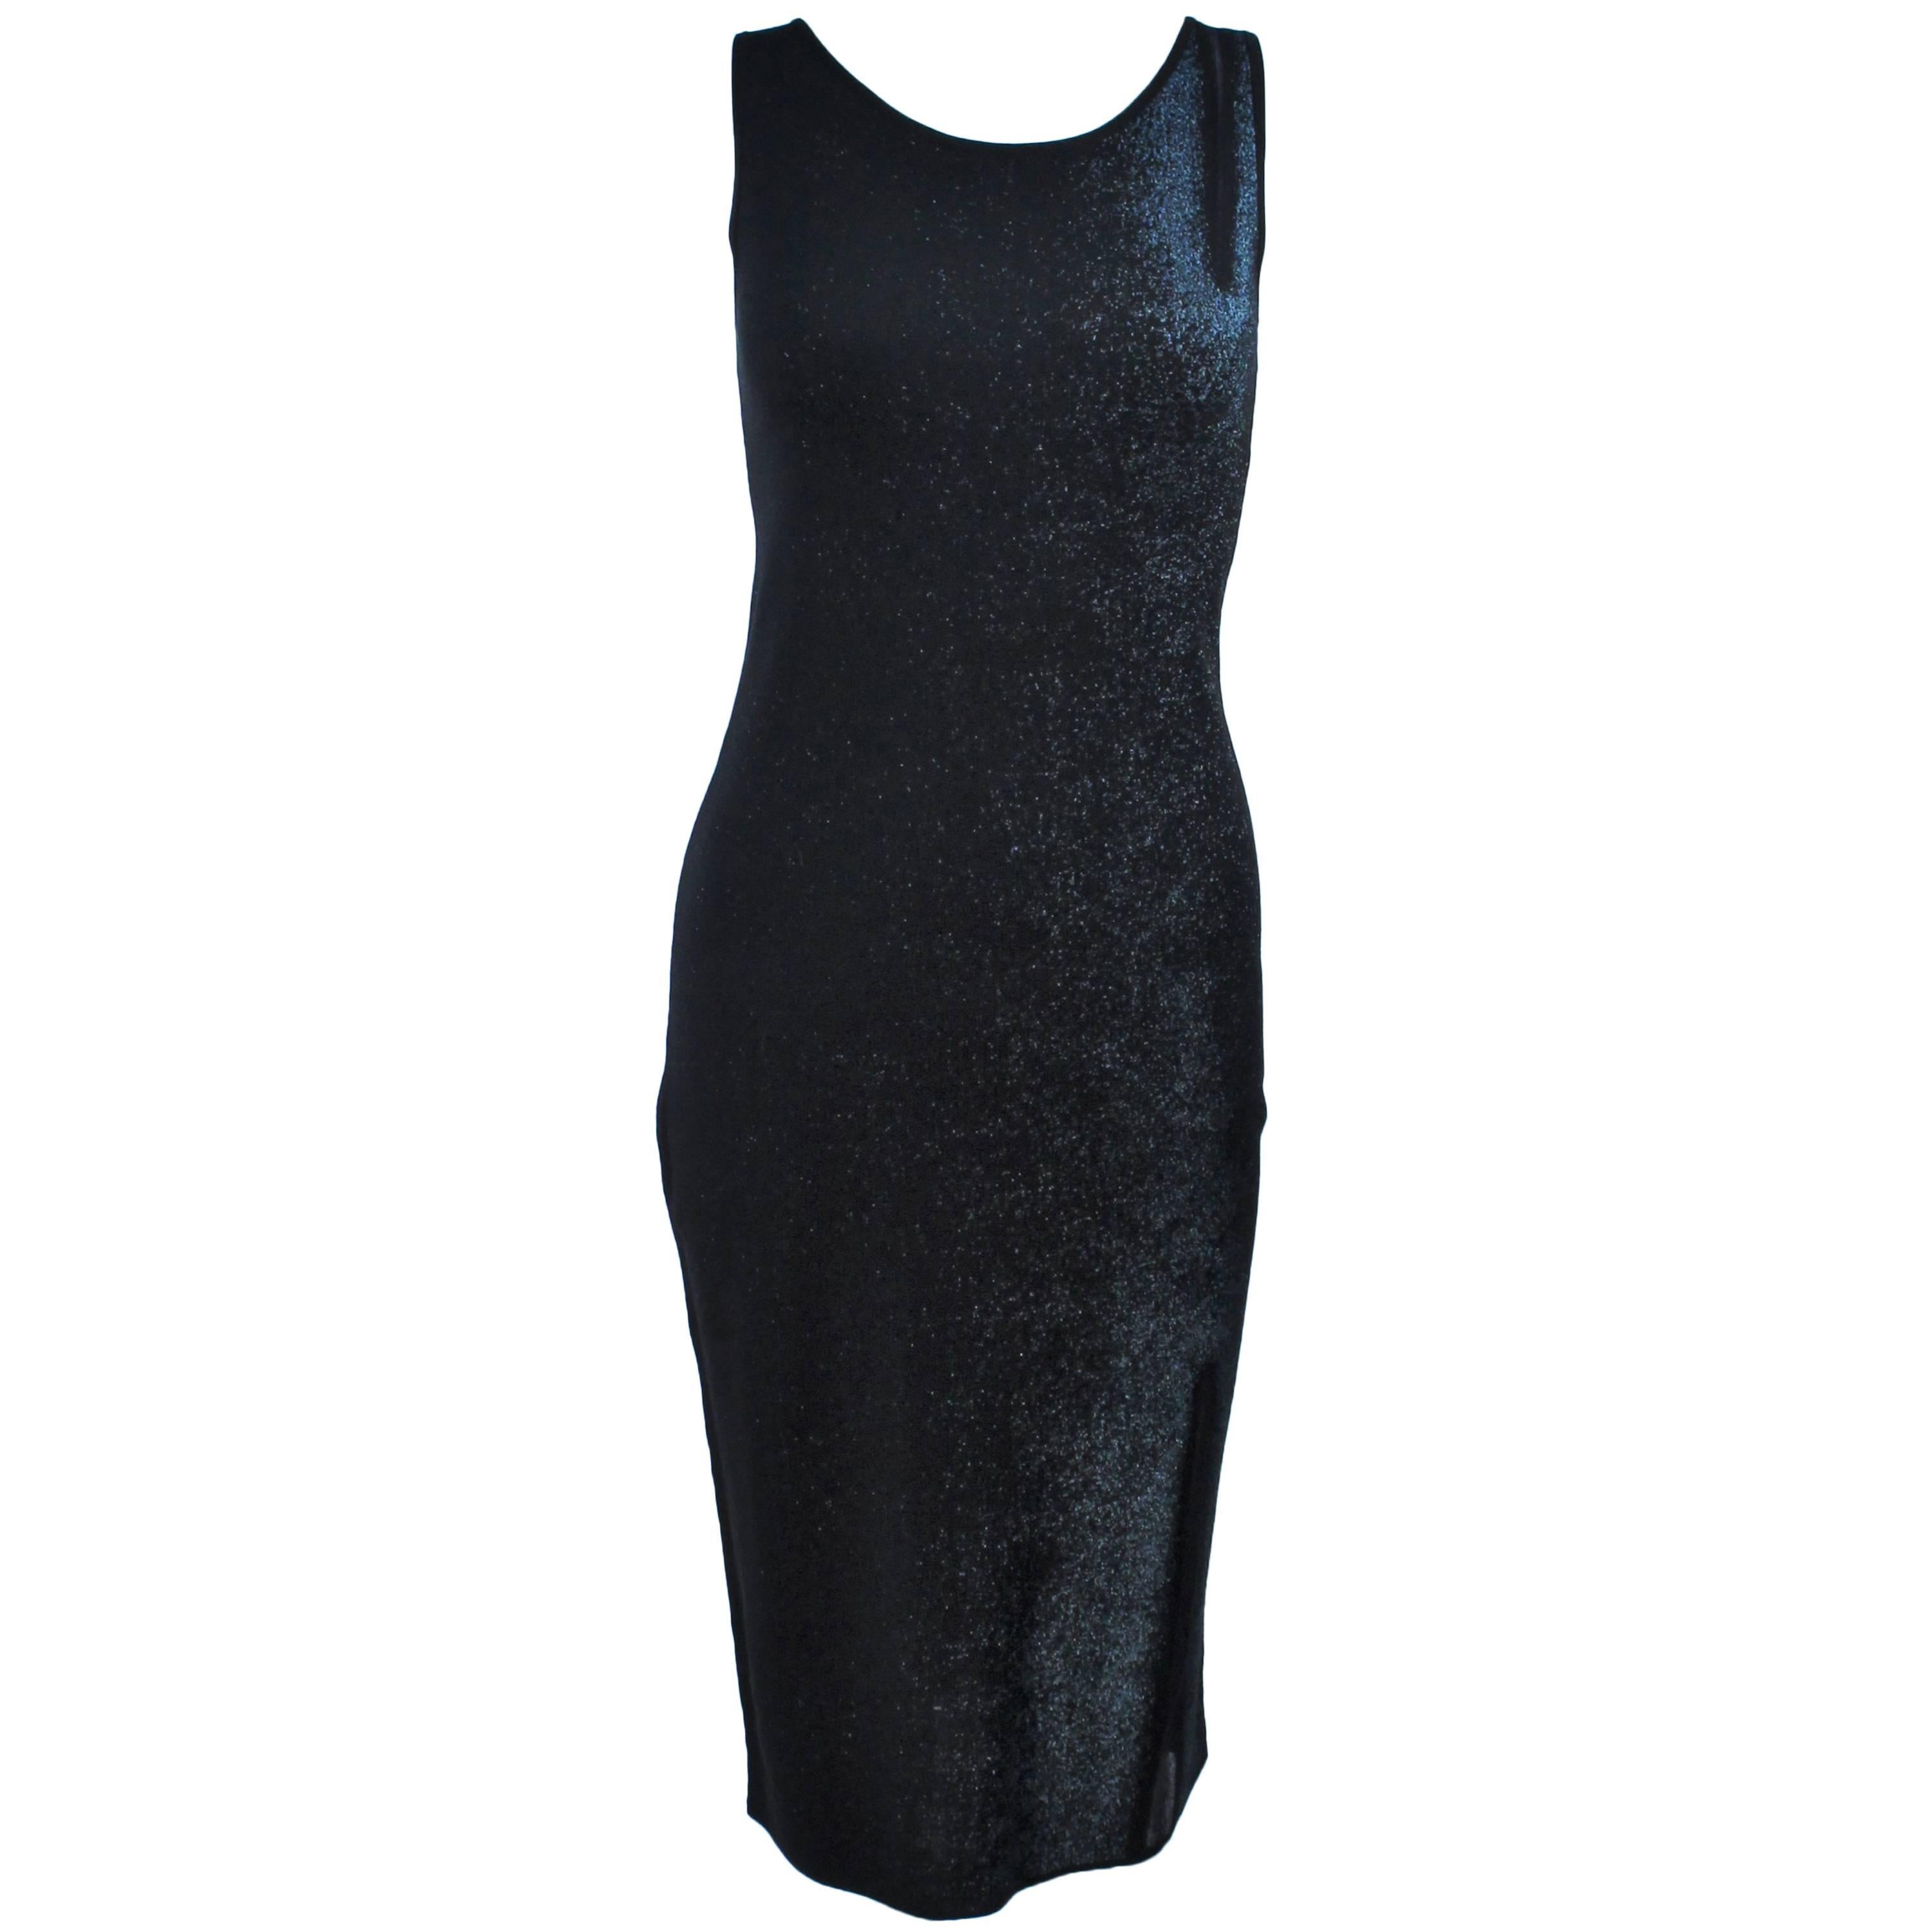 PORTS Black and Navy Metallic Stretch Dress with Sheer Detailing Size ...